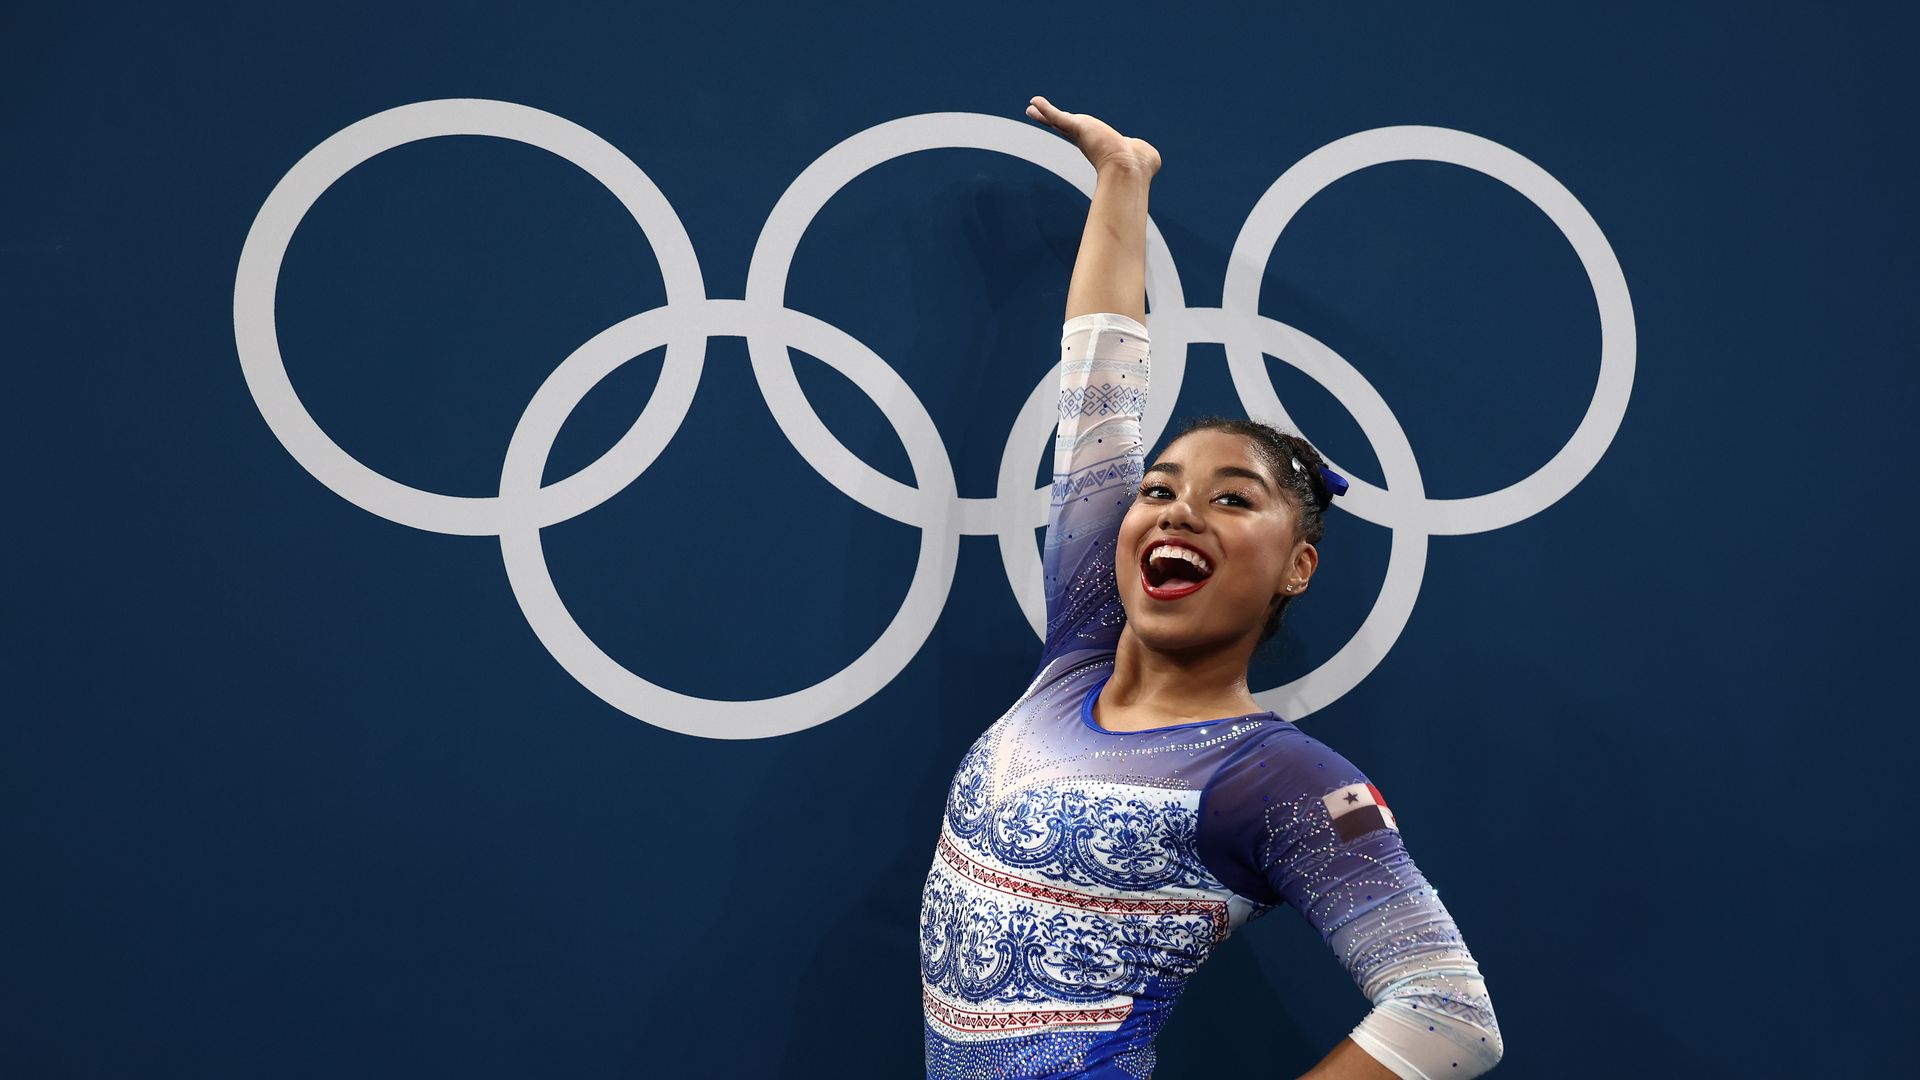 Panama's Hillary Heron makes history after becoming first gymnast to complete one of Simone Biles' skills